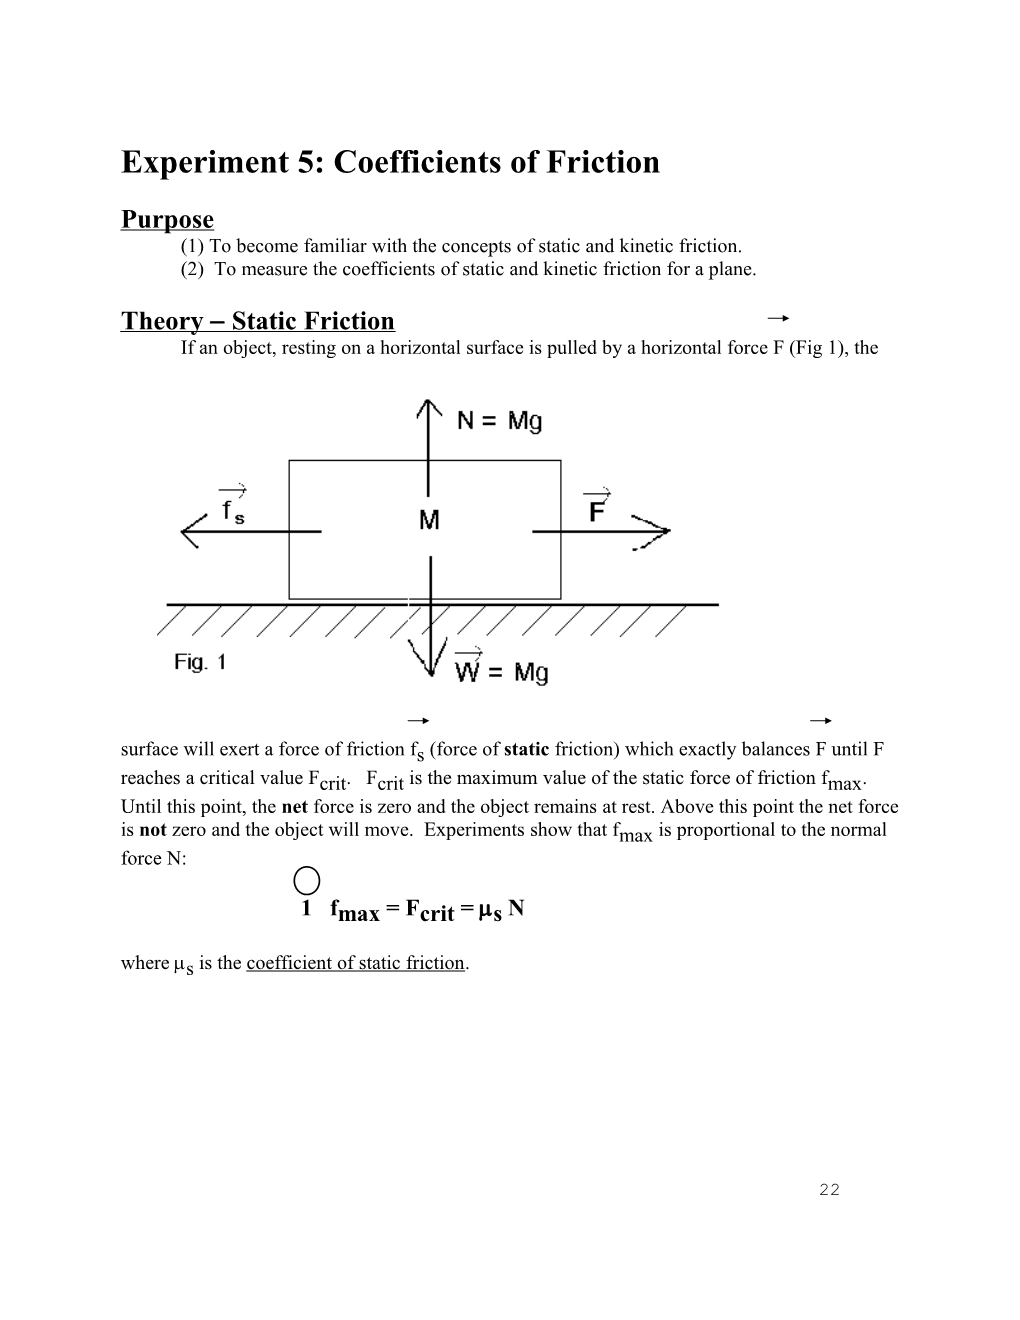 Experiment 3D Coefficients of Friction